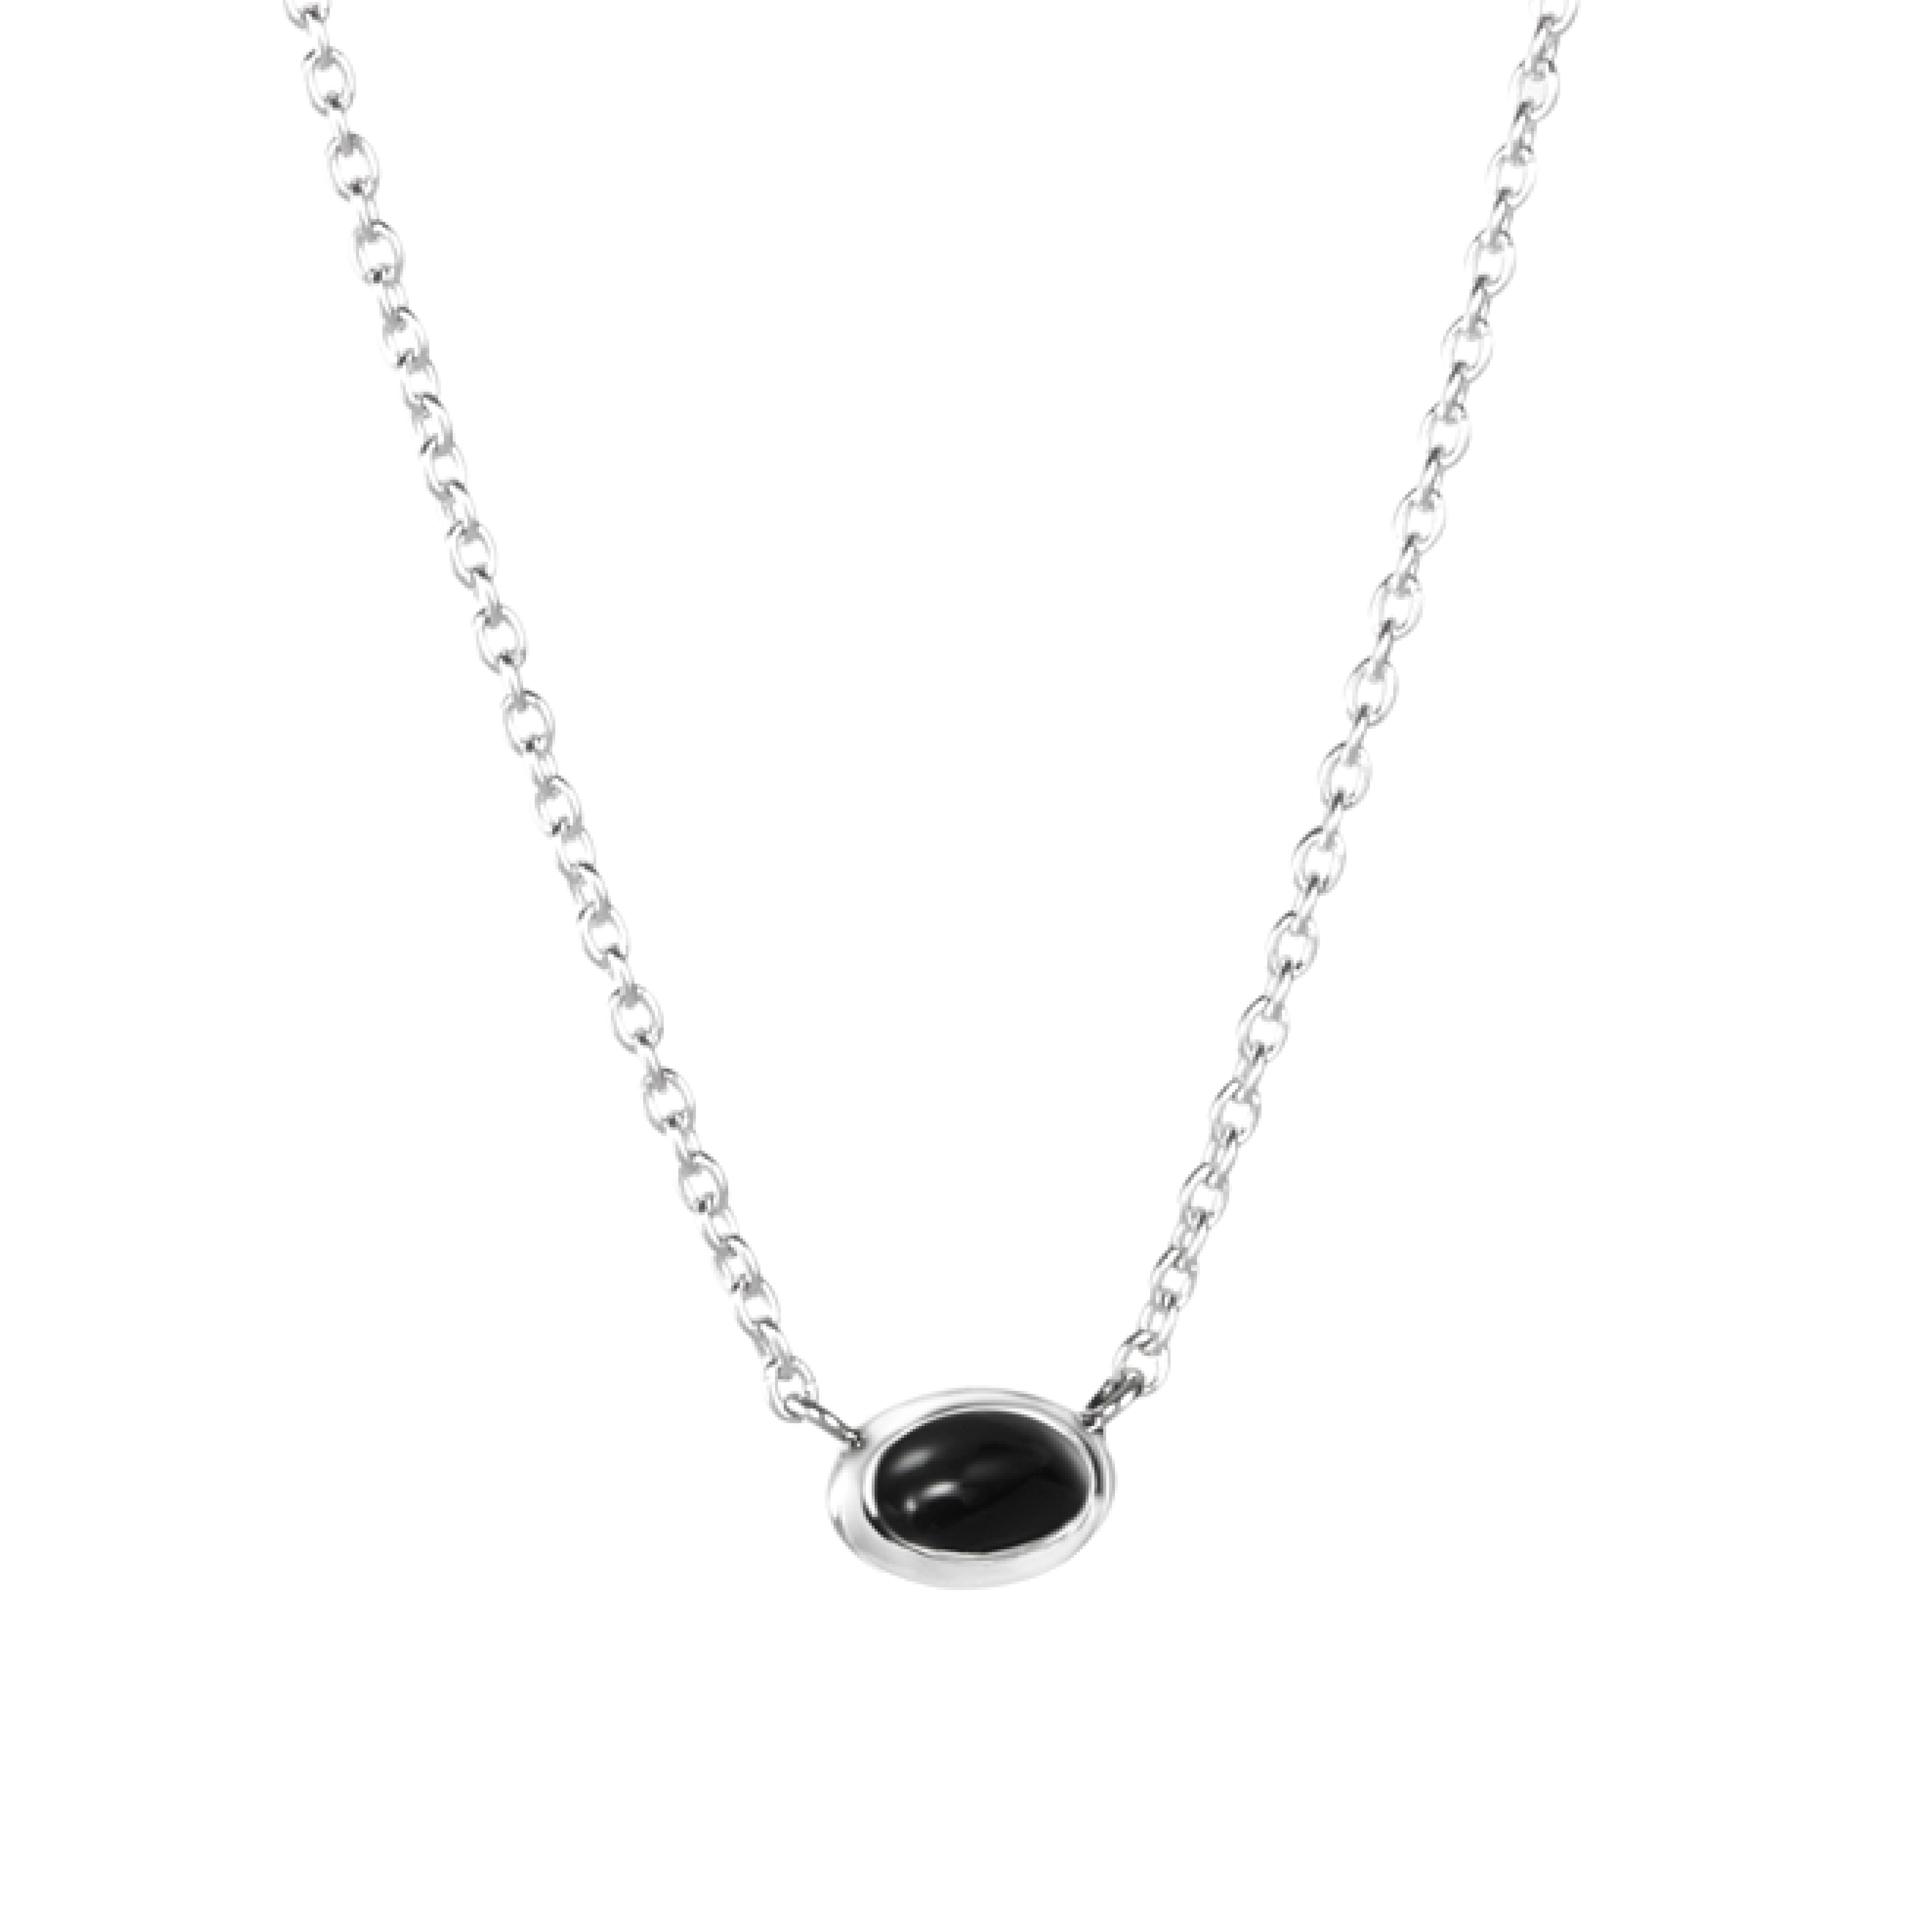 LOVE BEAD NECKLACE SILVER - ONYX